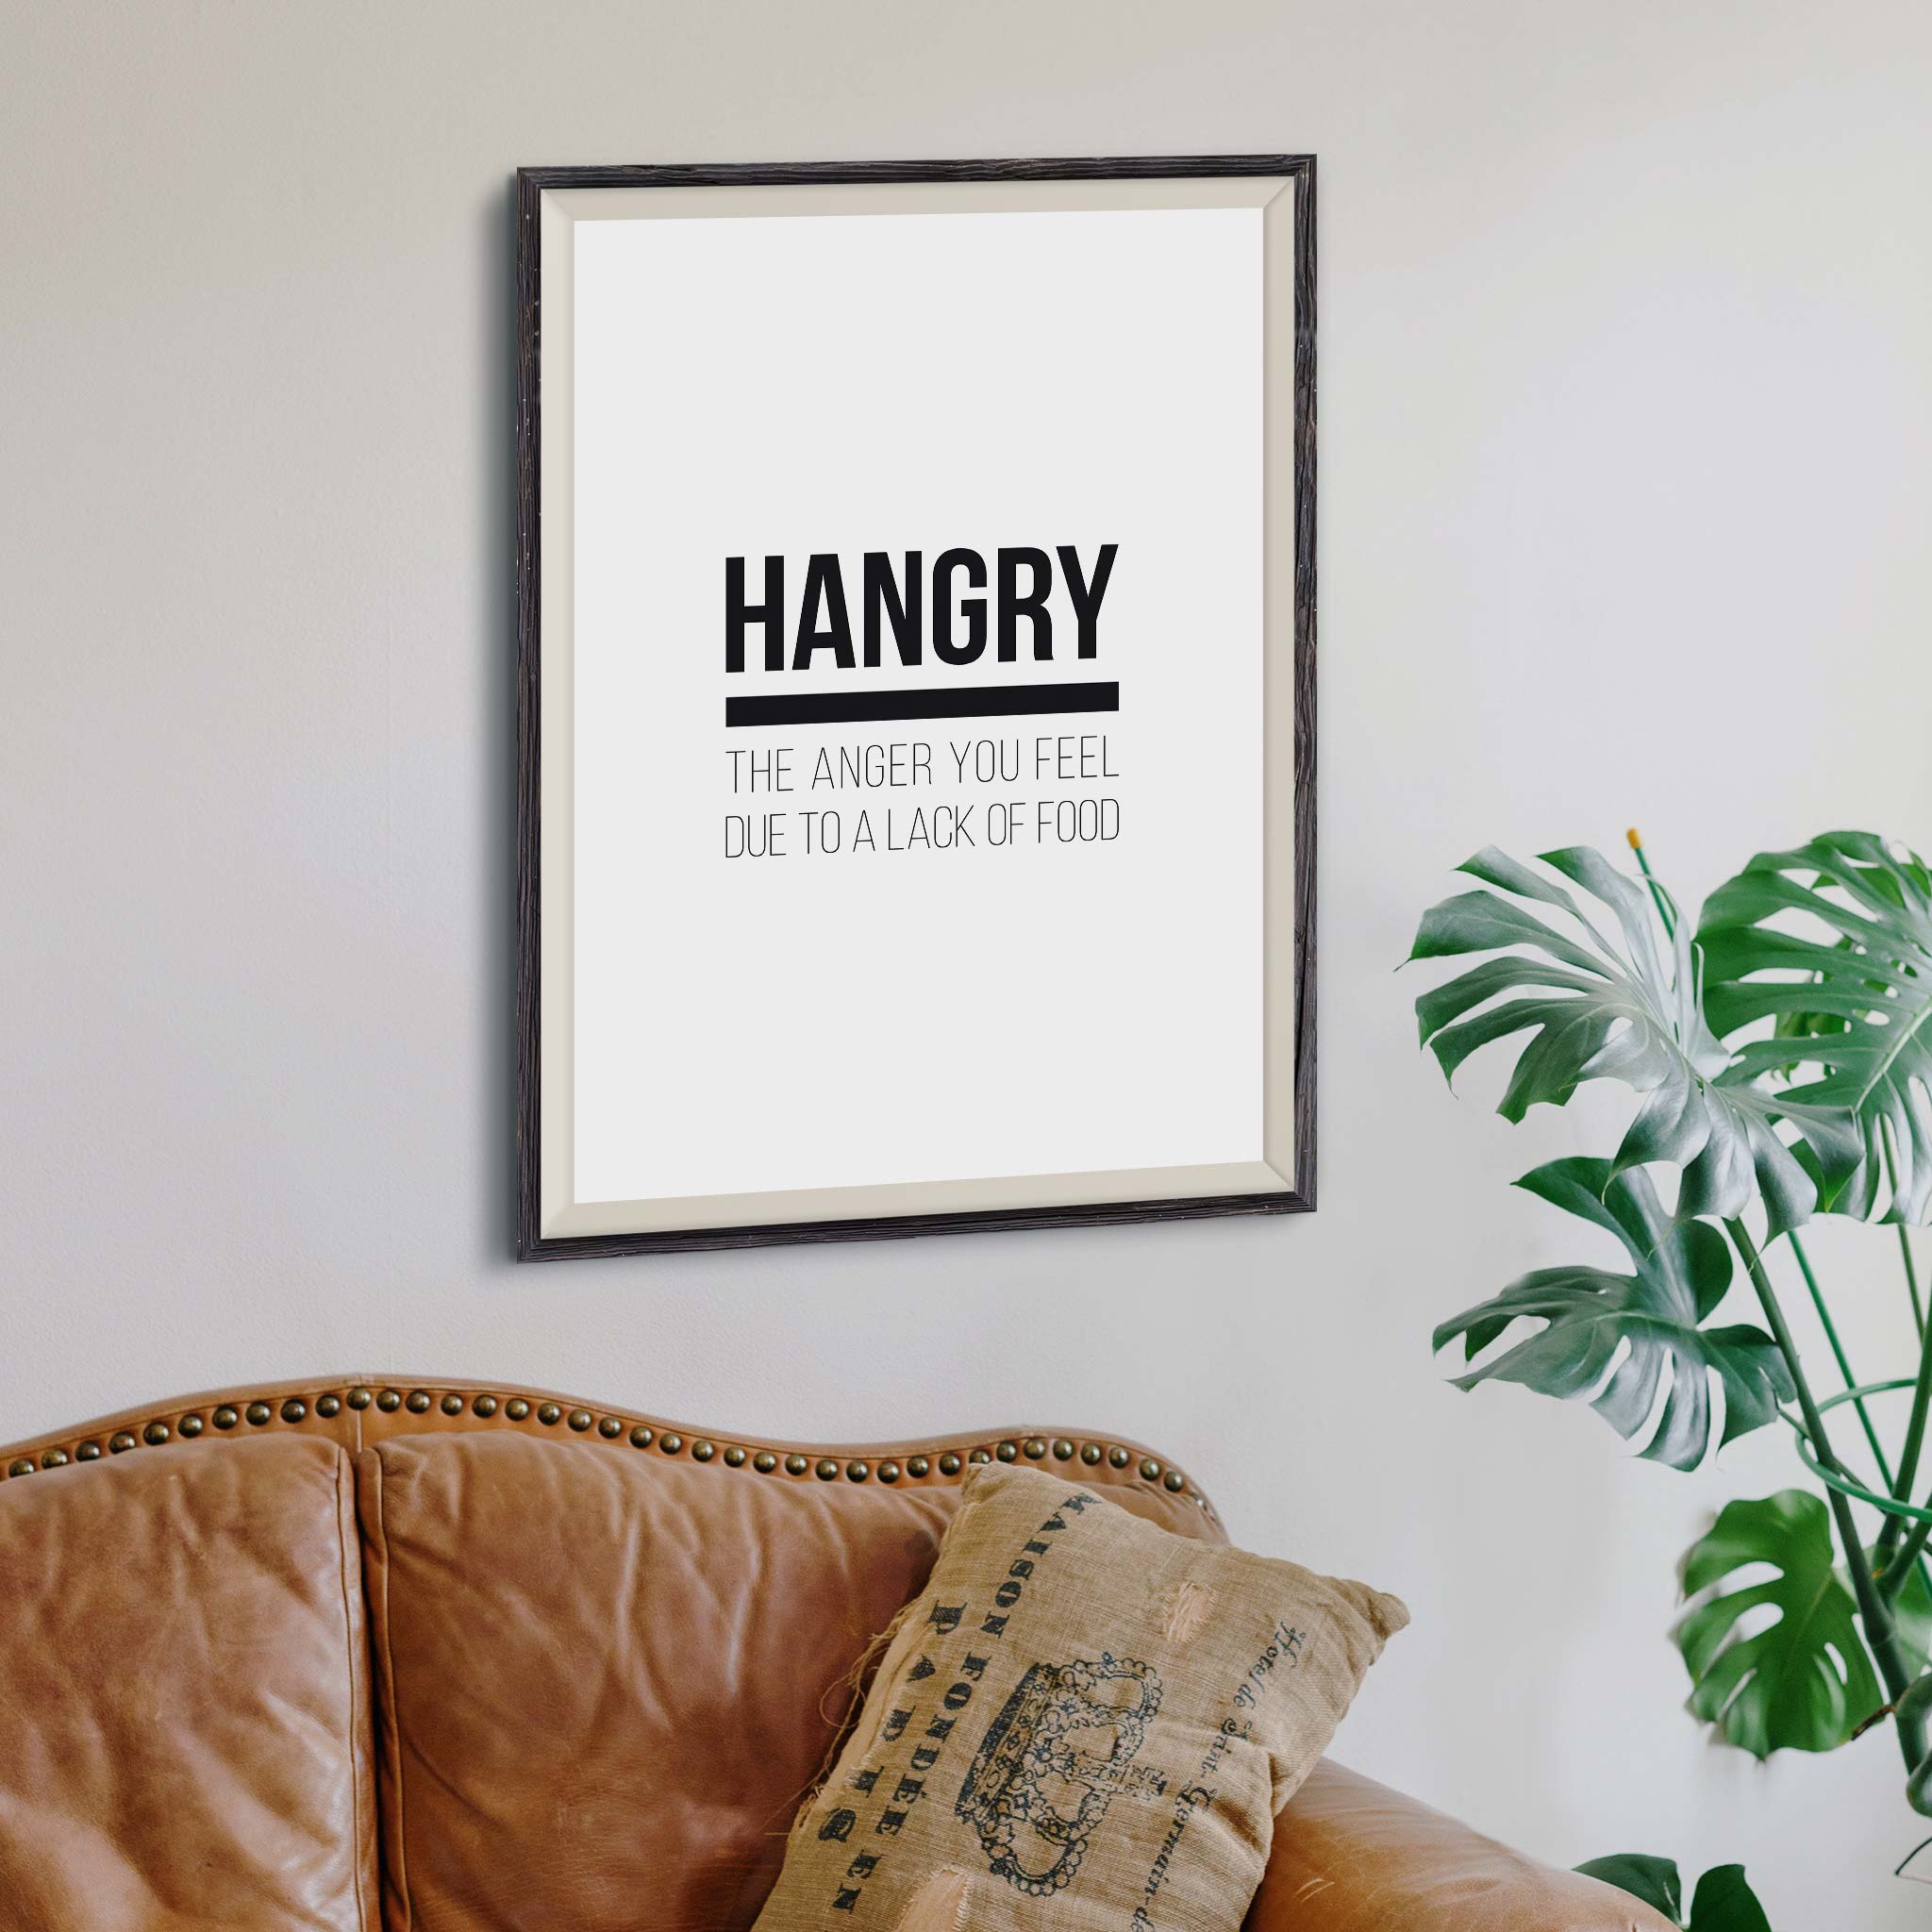 Hangry - the anger you feel due to a lack of food